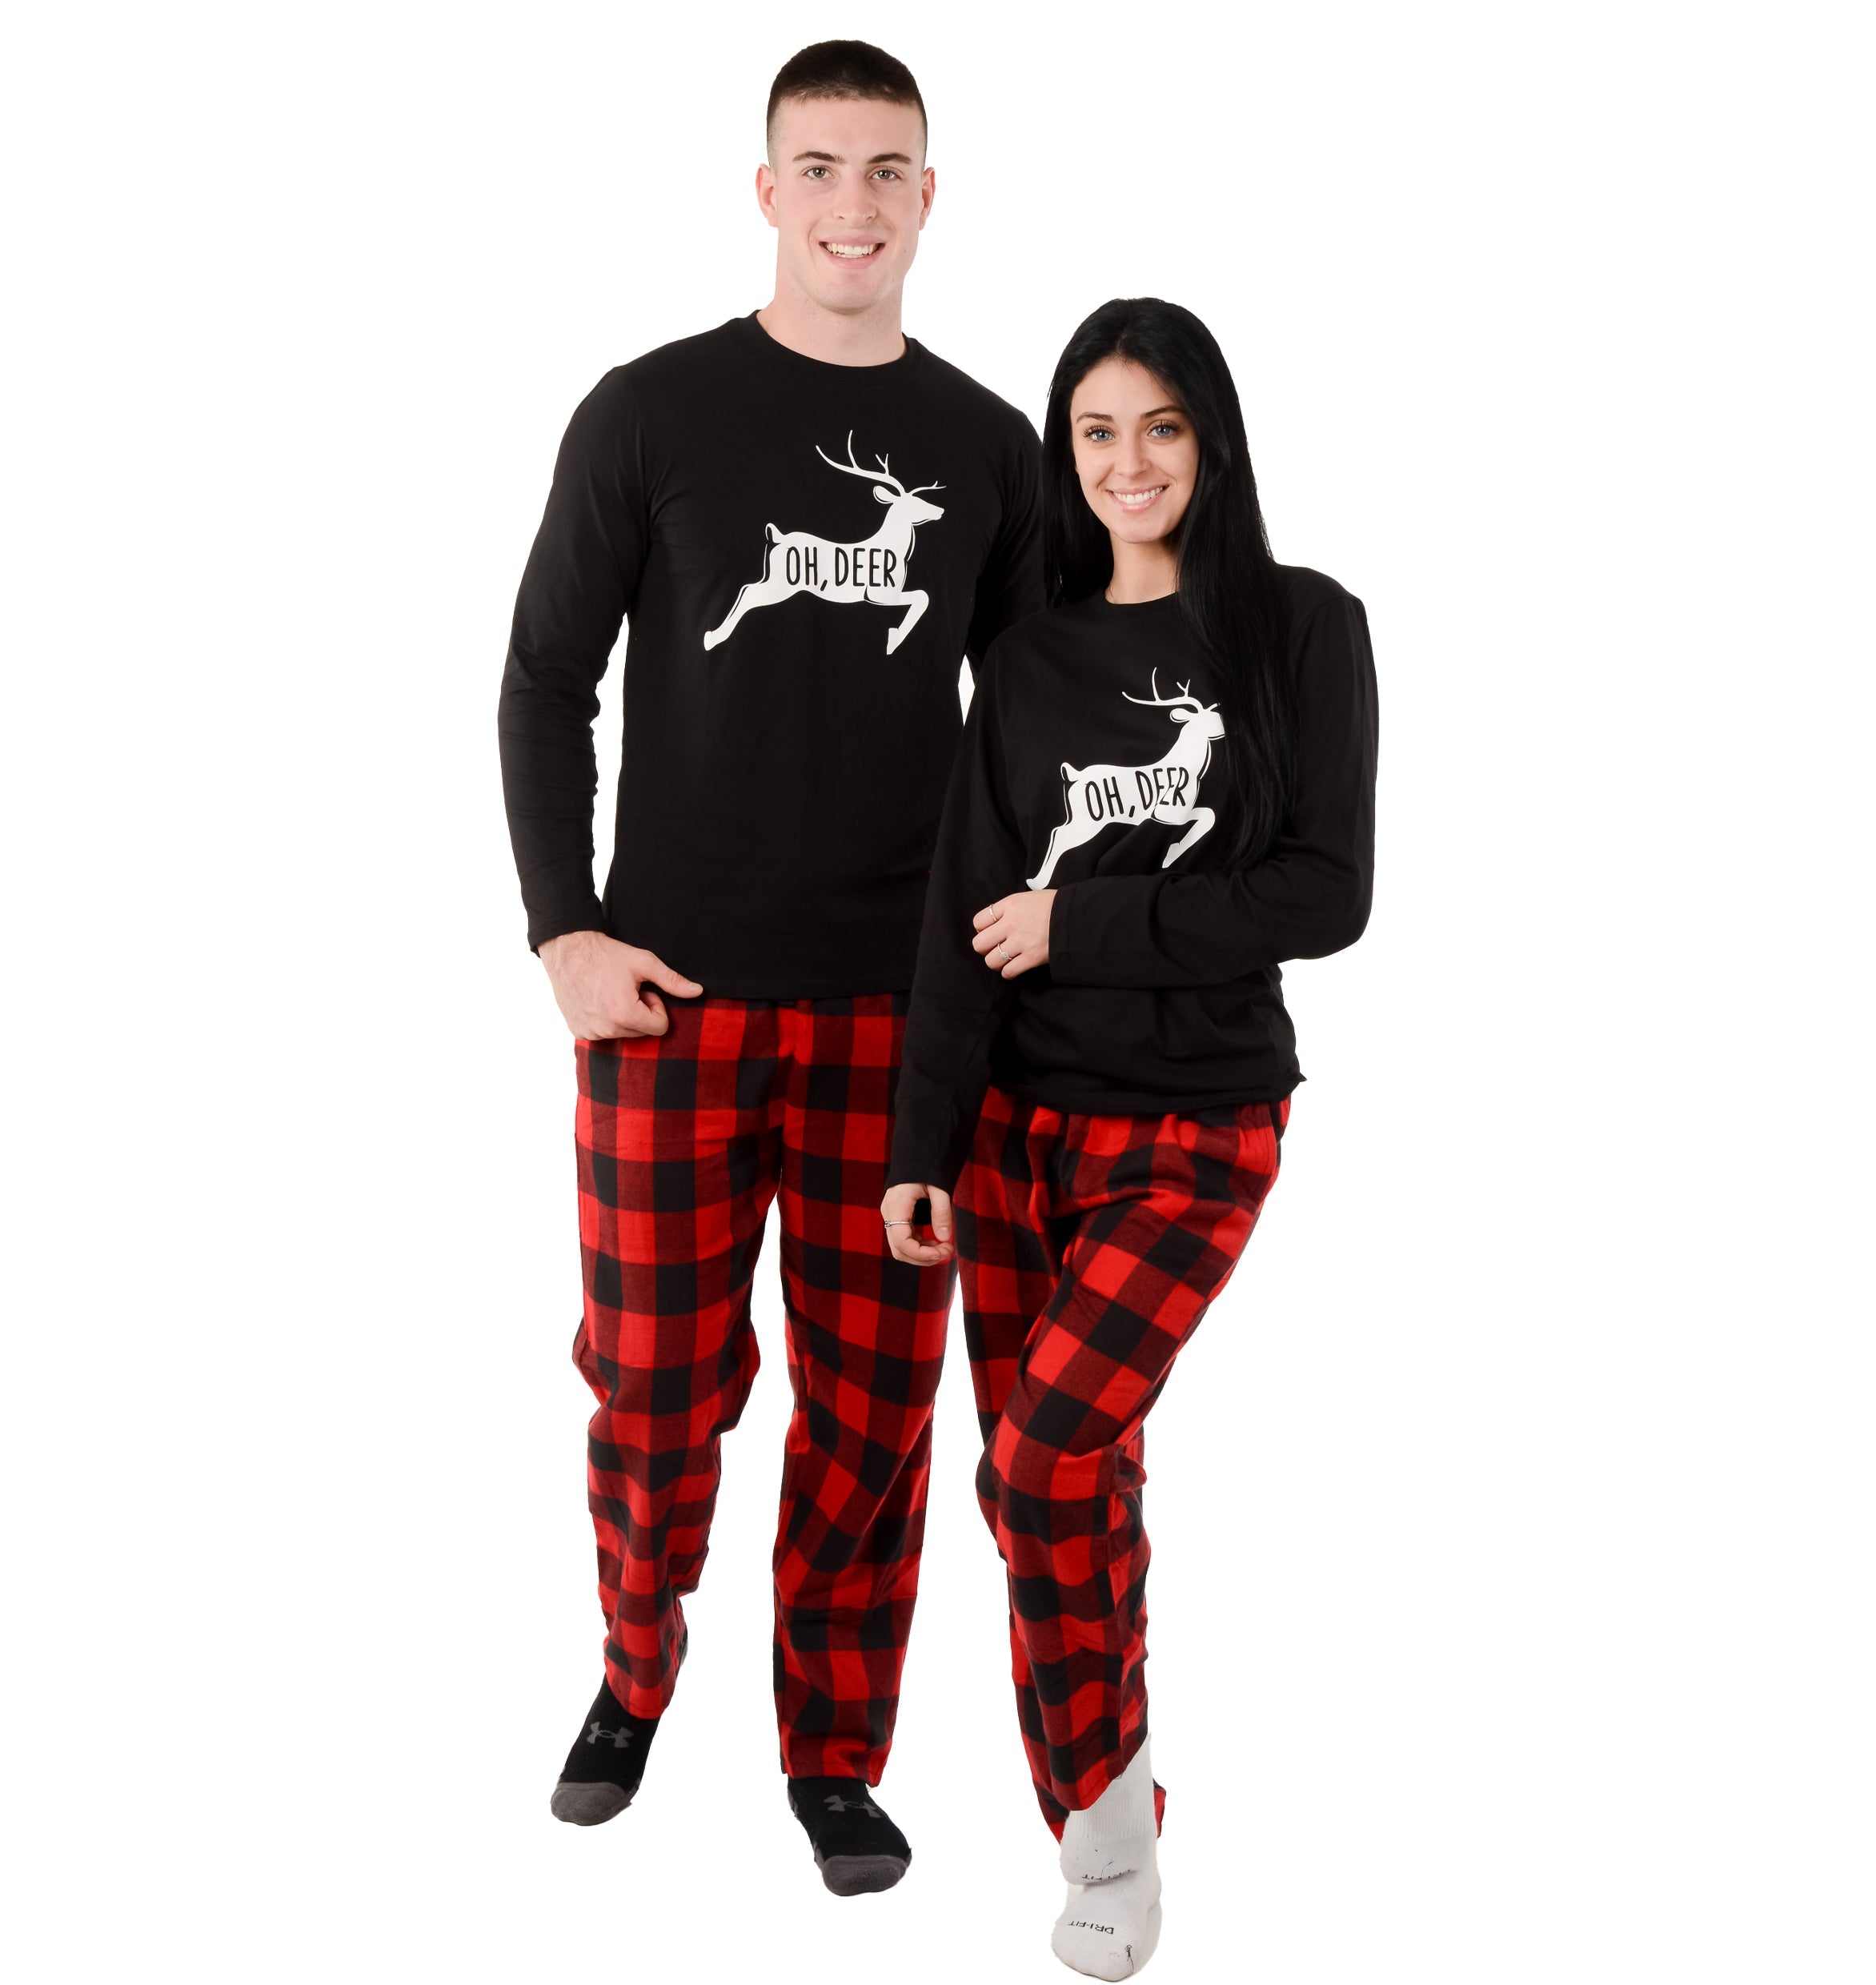 Shop for Nightwear, Christmas Matching Sets